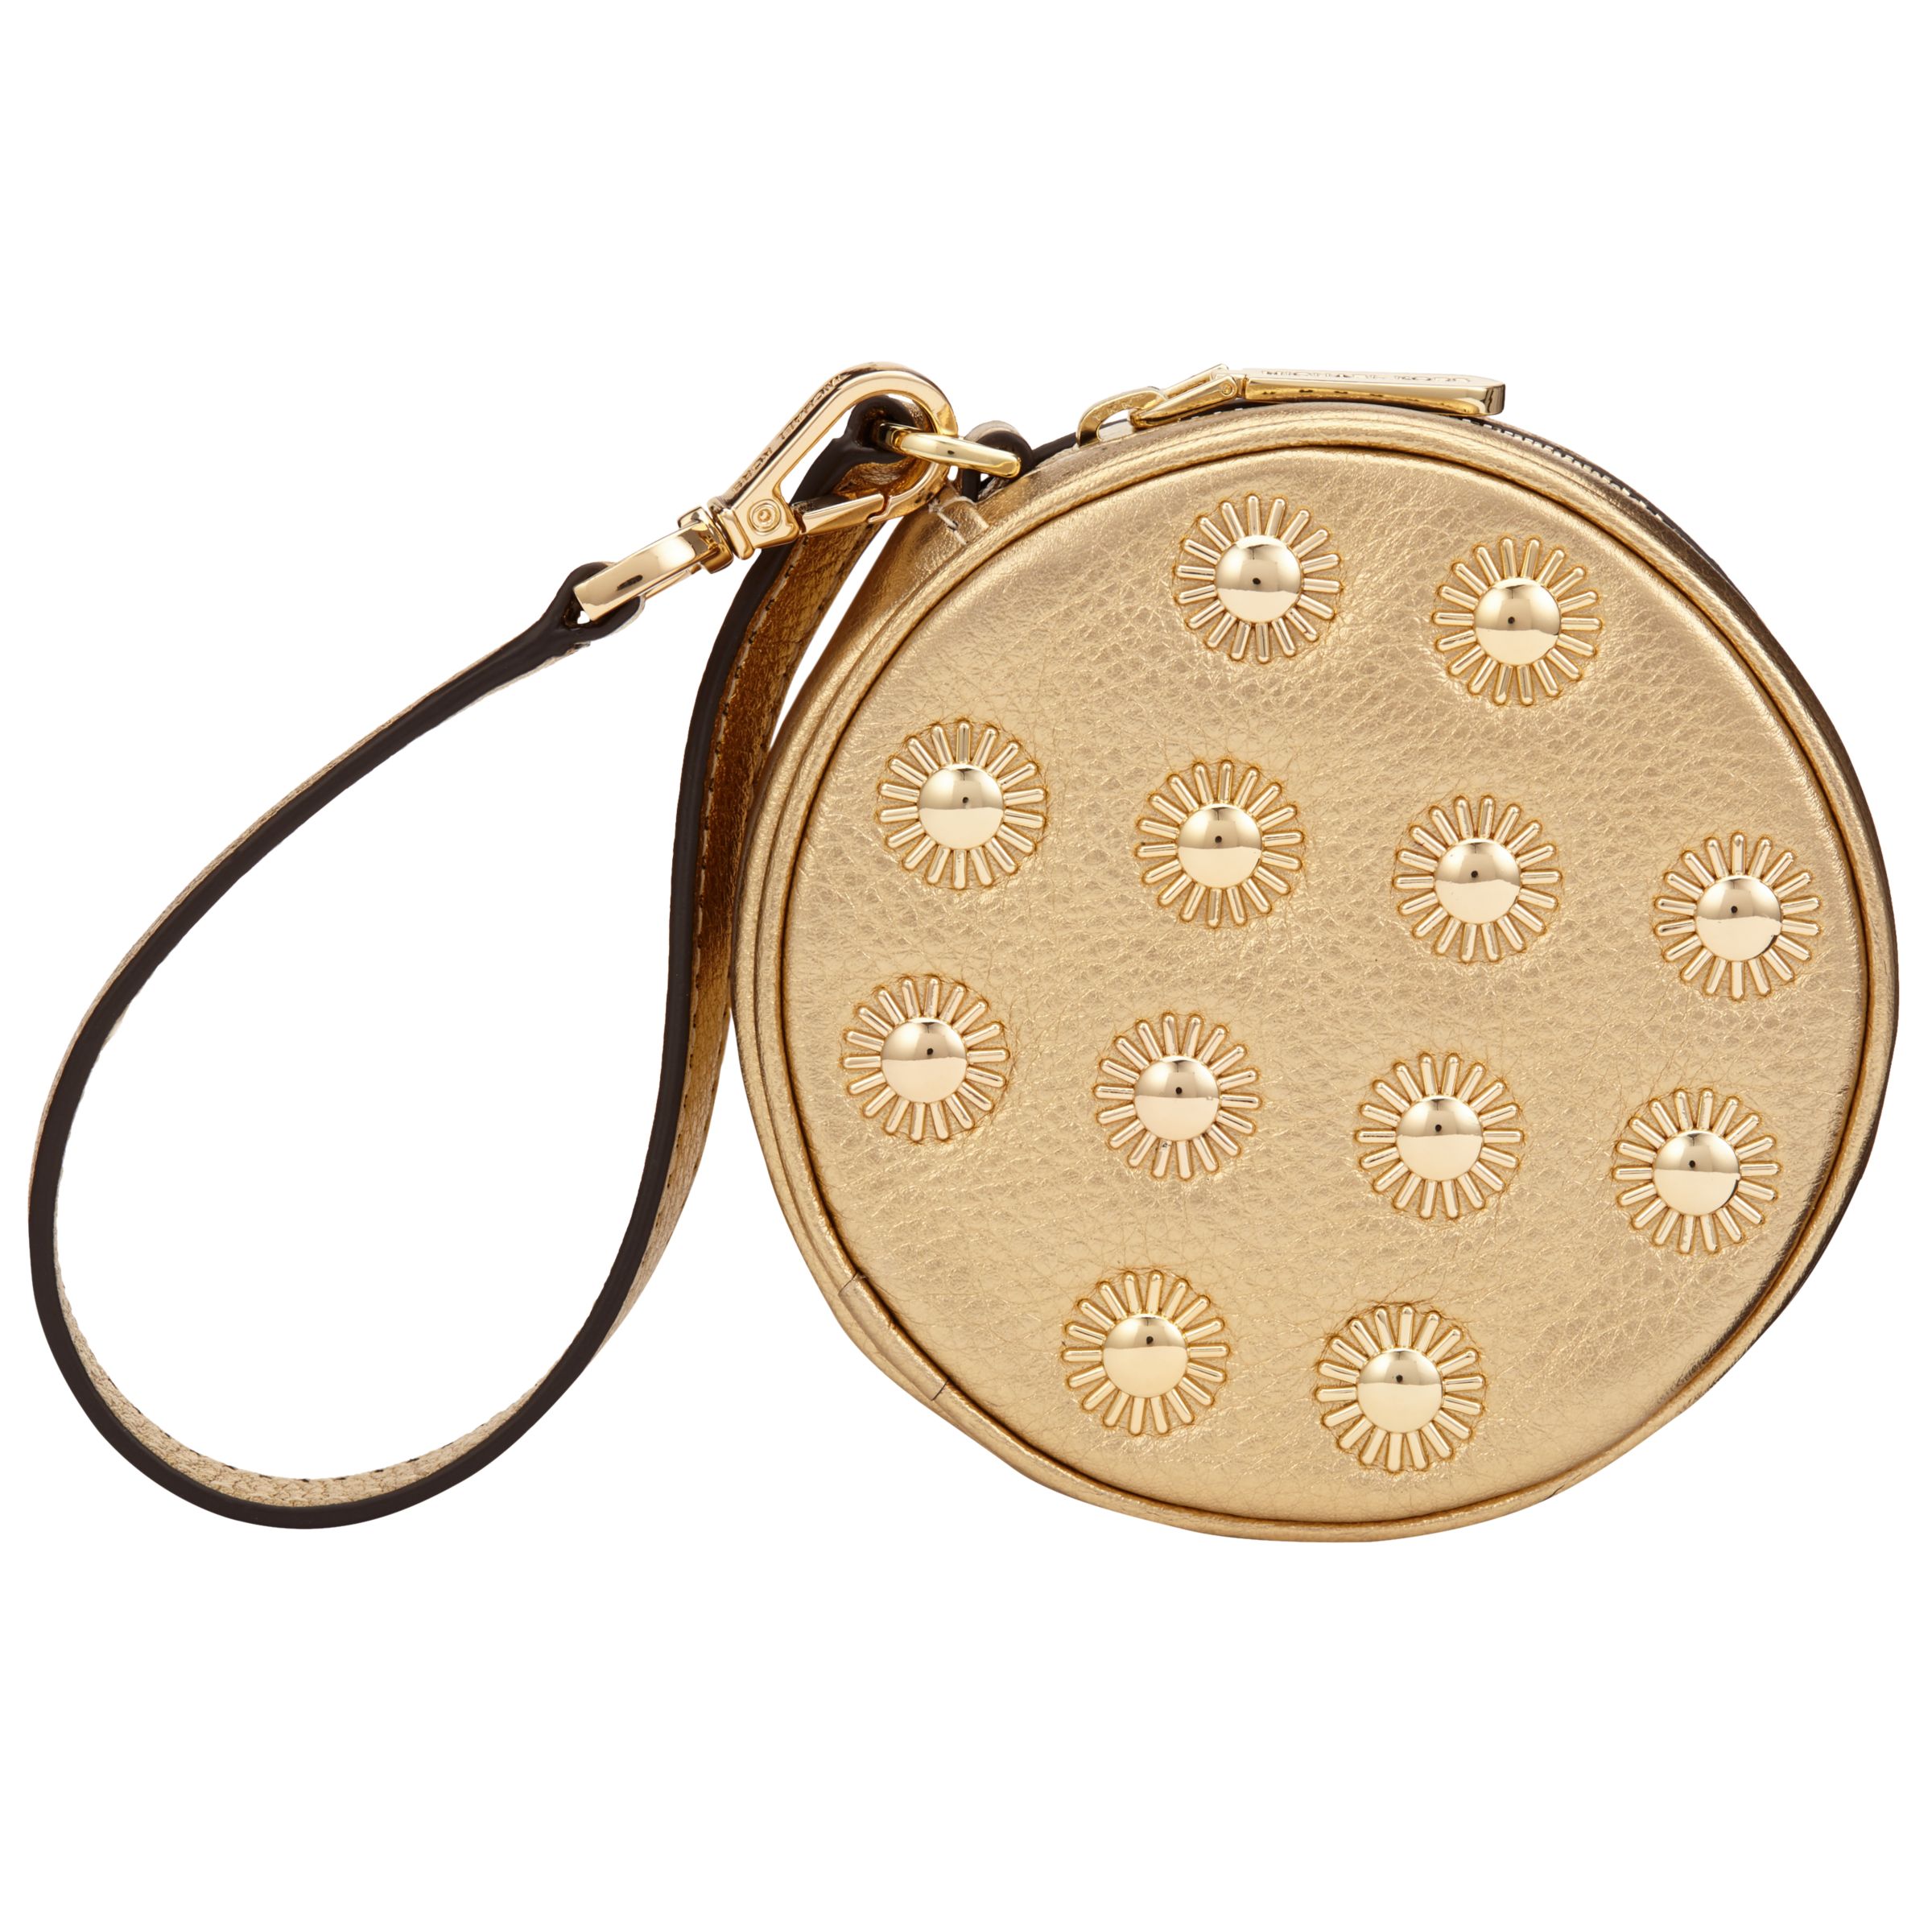 MICHAEL Michael Kors Studded Leather Small Coin Purse at John Lewis & Partners